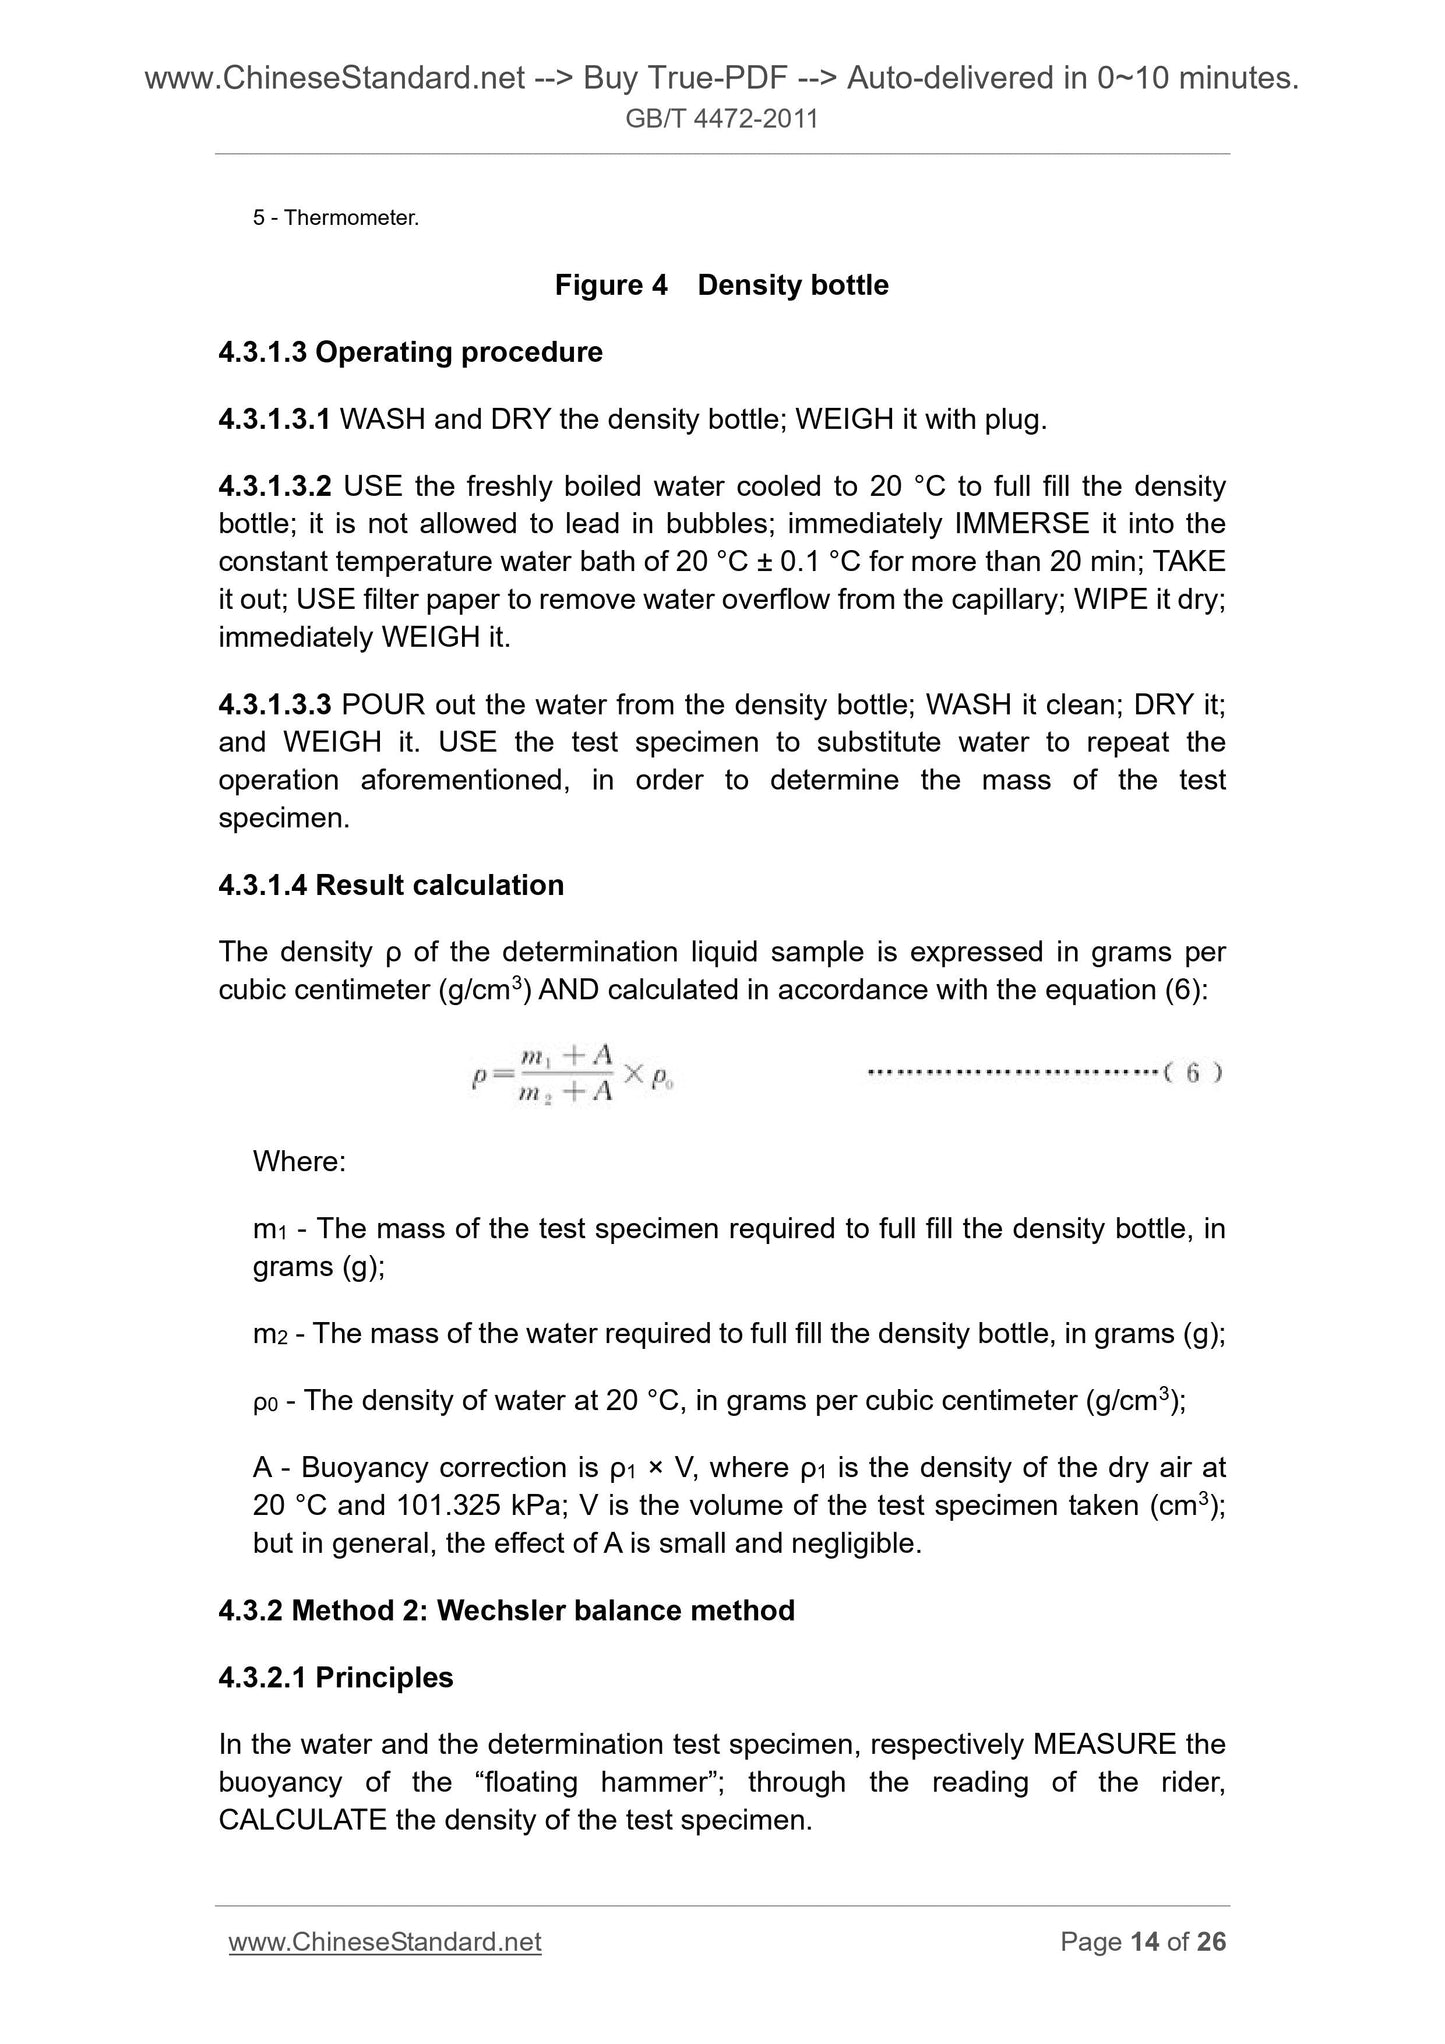 GB/T 4472-2011 Page 8